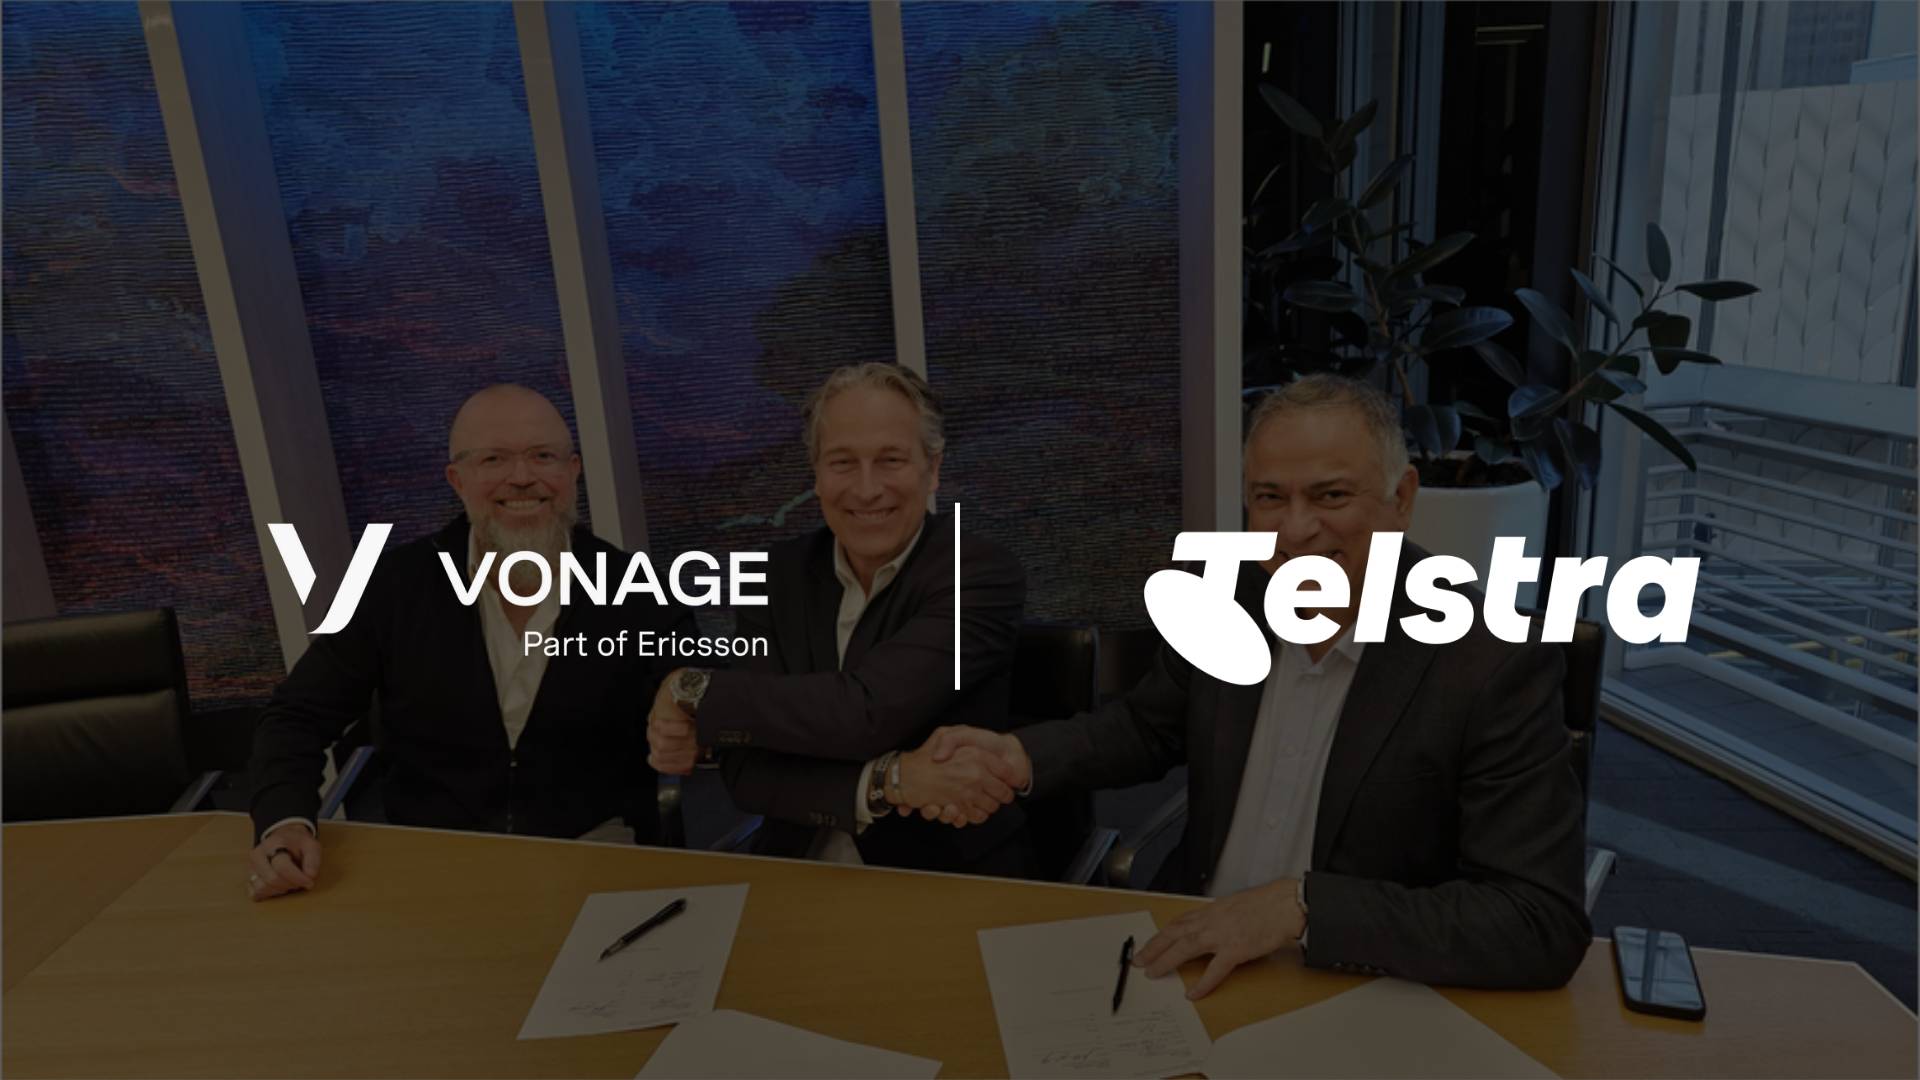 Vonage Partners with Telstra to Accelerate Digital Transformation Through Network APIs